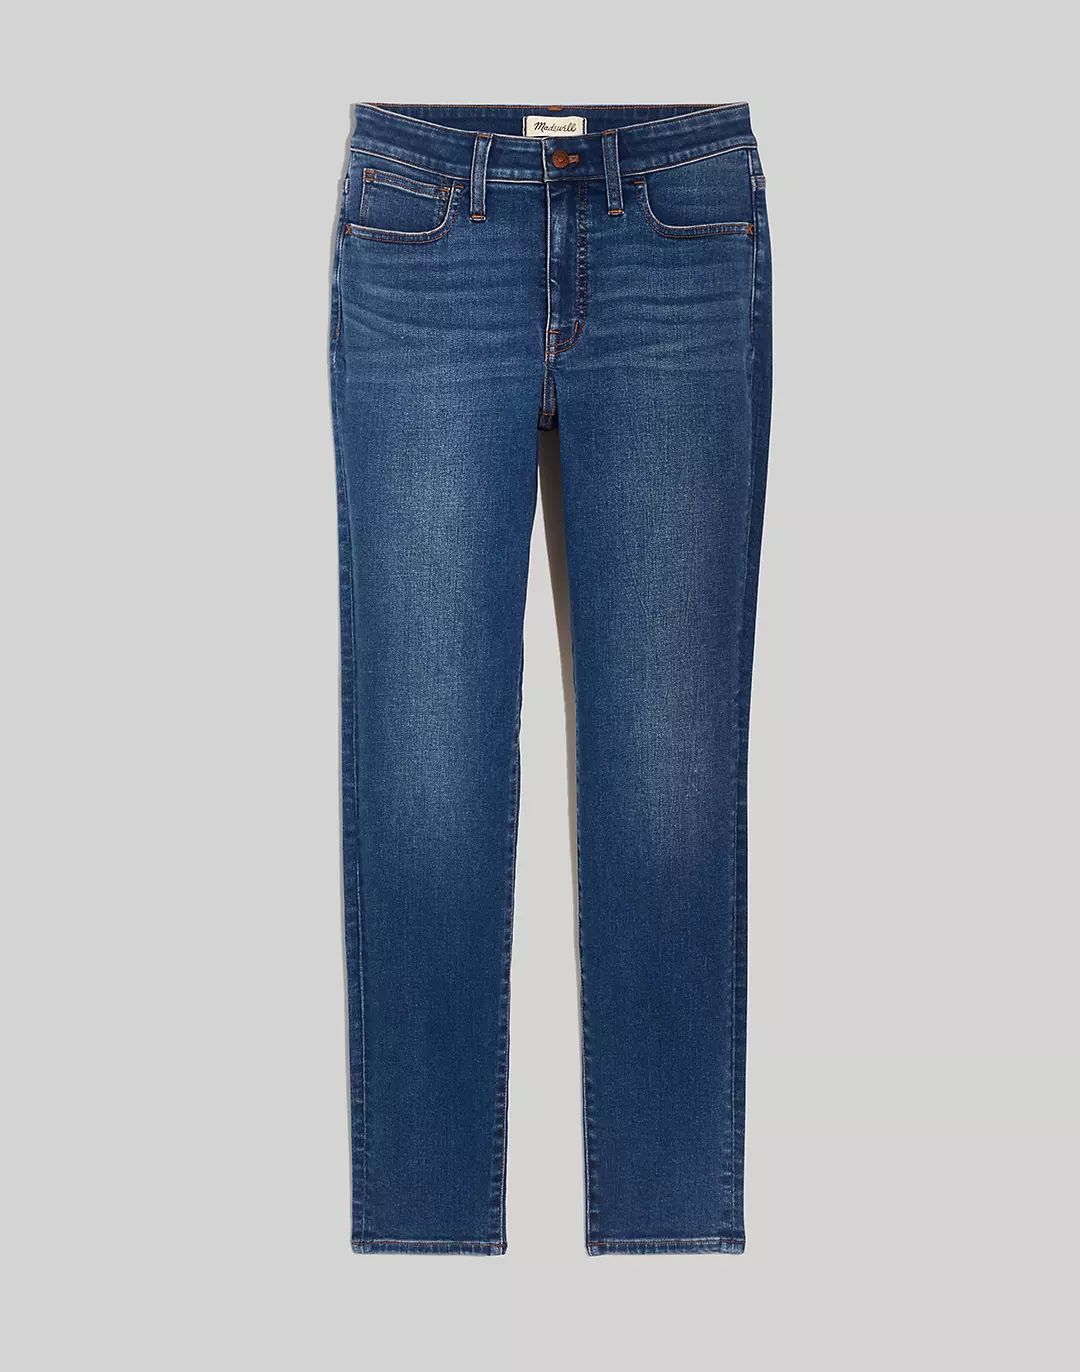 Curvy Roadtripper Authentic Skinny Jeans in Roselawn Wash | Madewell